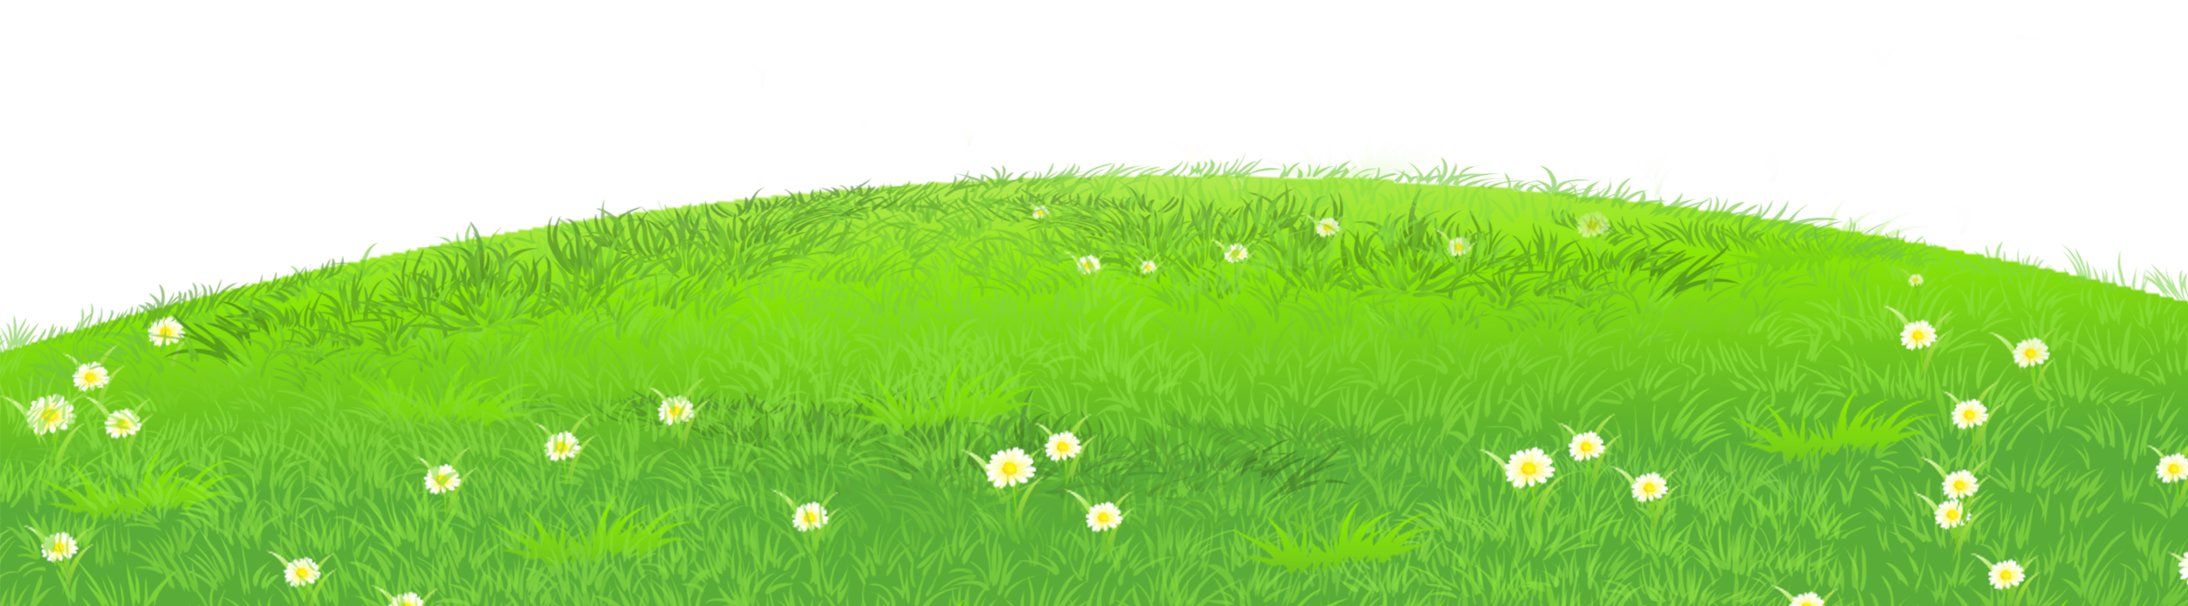 Download PNG image - Field PNG Image 